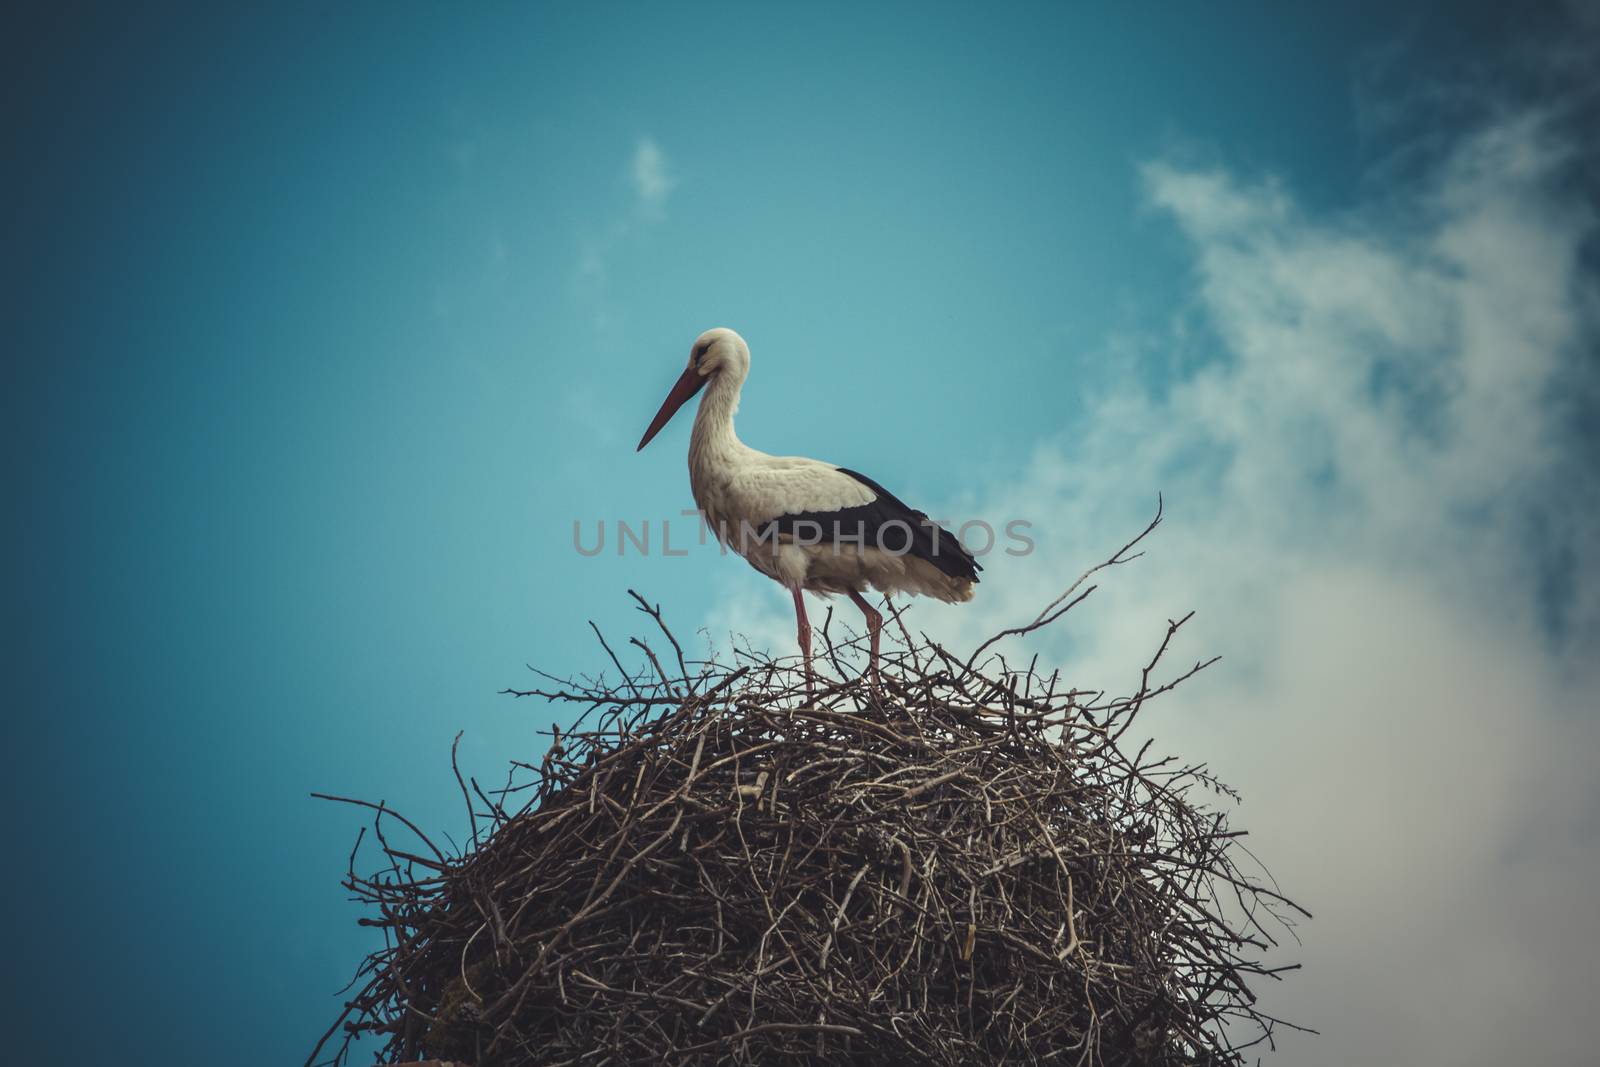 Bird, Stork nest made ������of tree branches over blue sky in dr by FernandoCortes